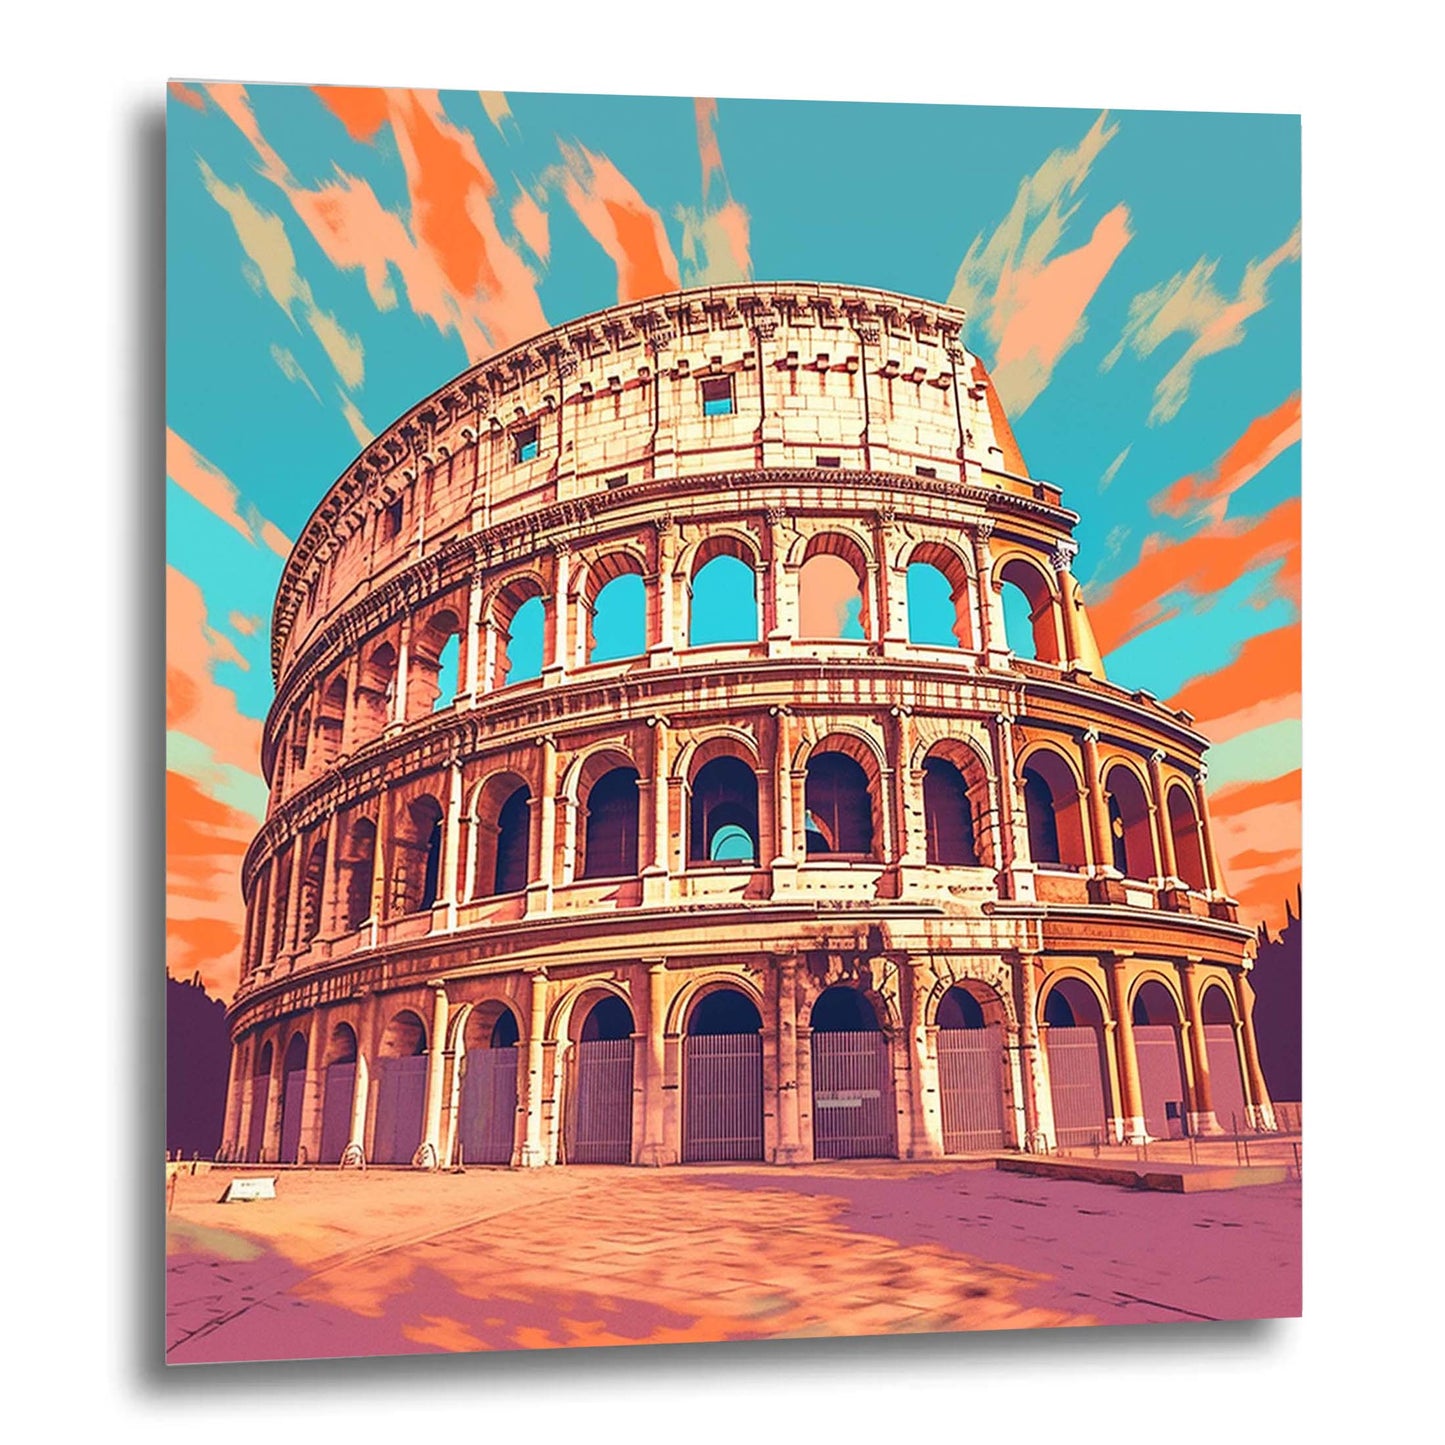 Rome Colosseum - mural in the style of minimalism